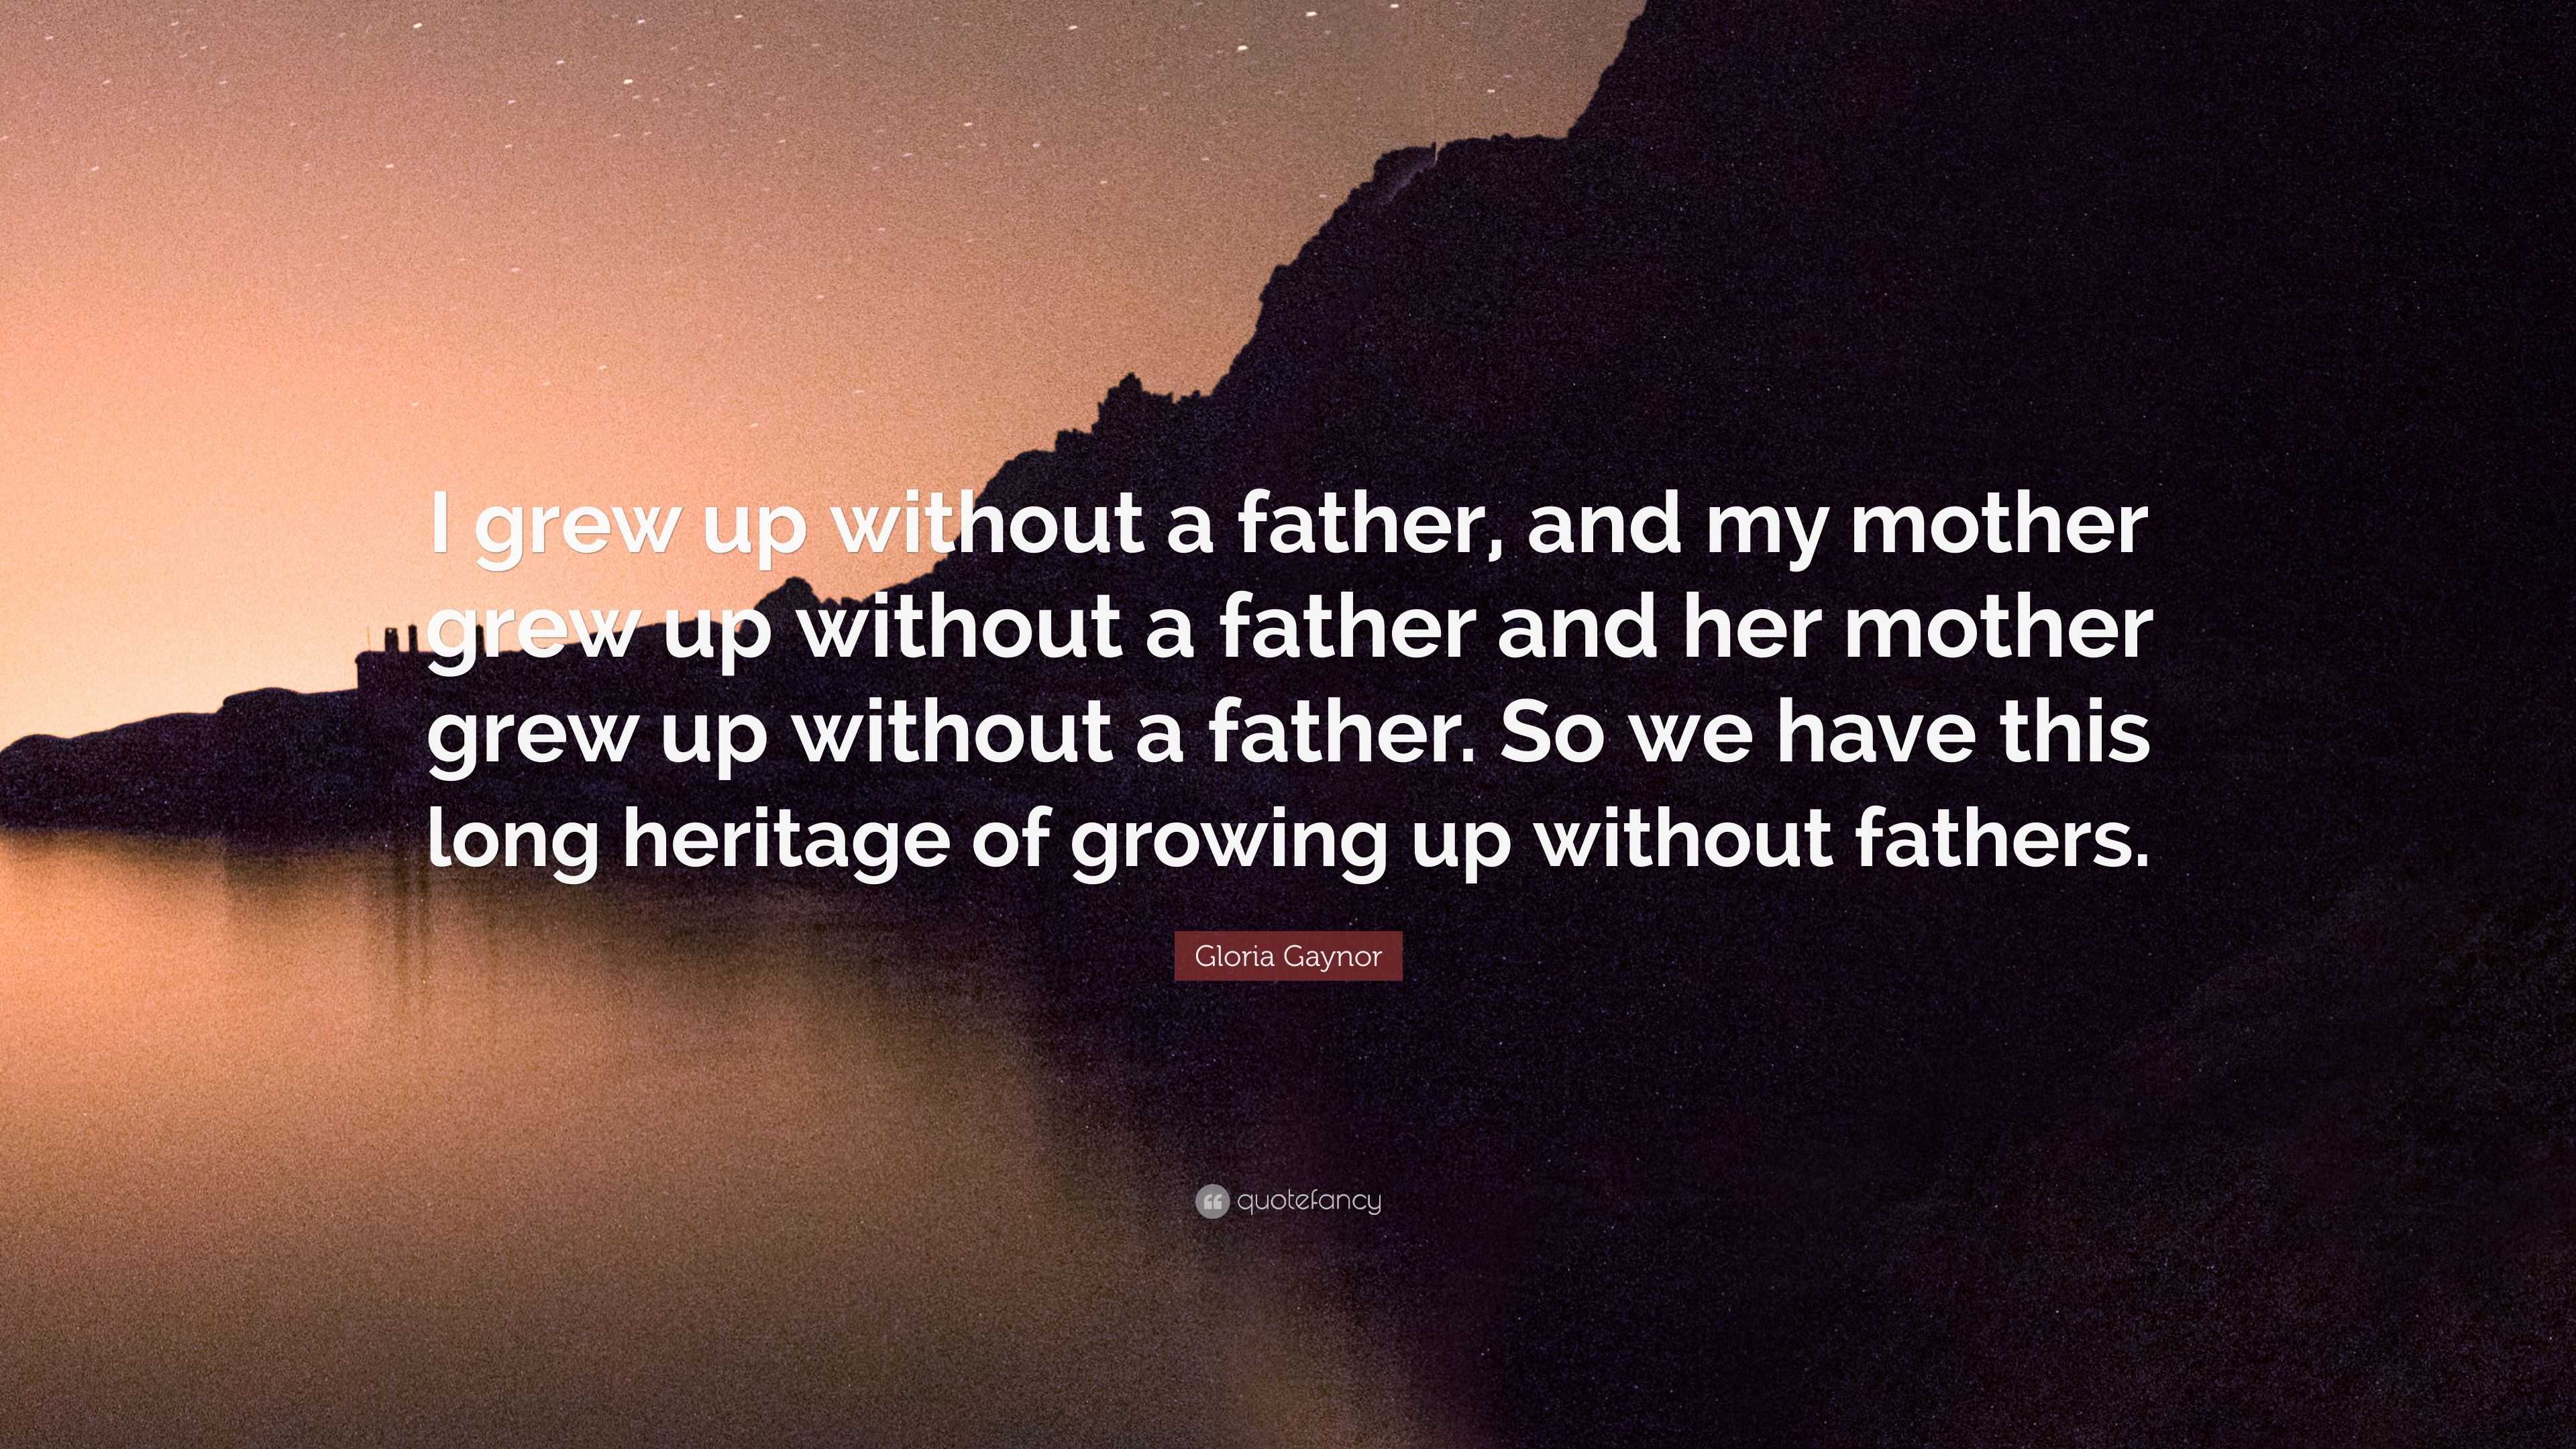 Gloria Gaynor Quote “i Grew Up Without A Father And My Mother Grew Up Without A Father And Her